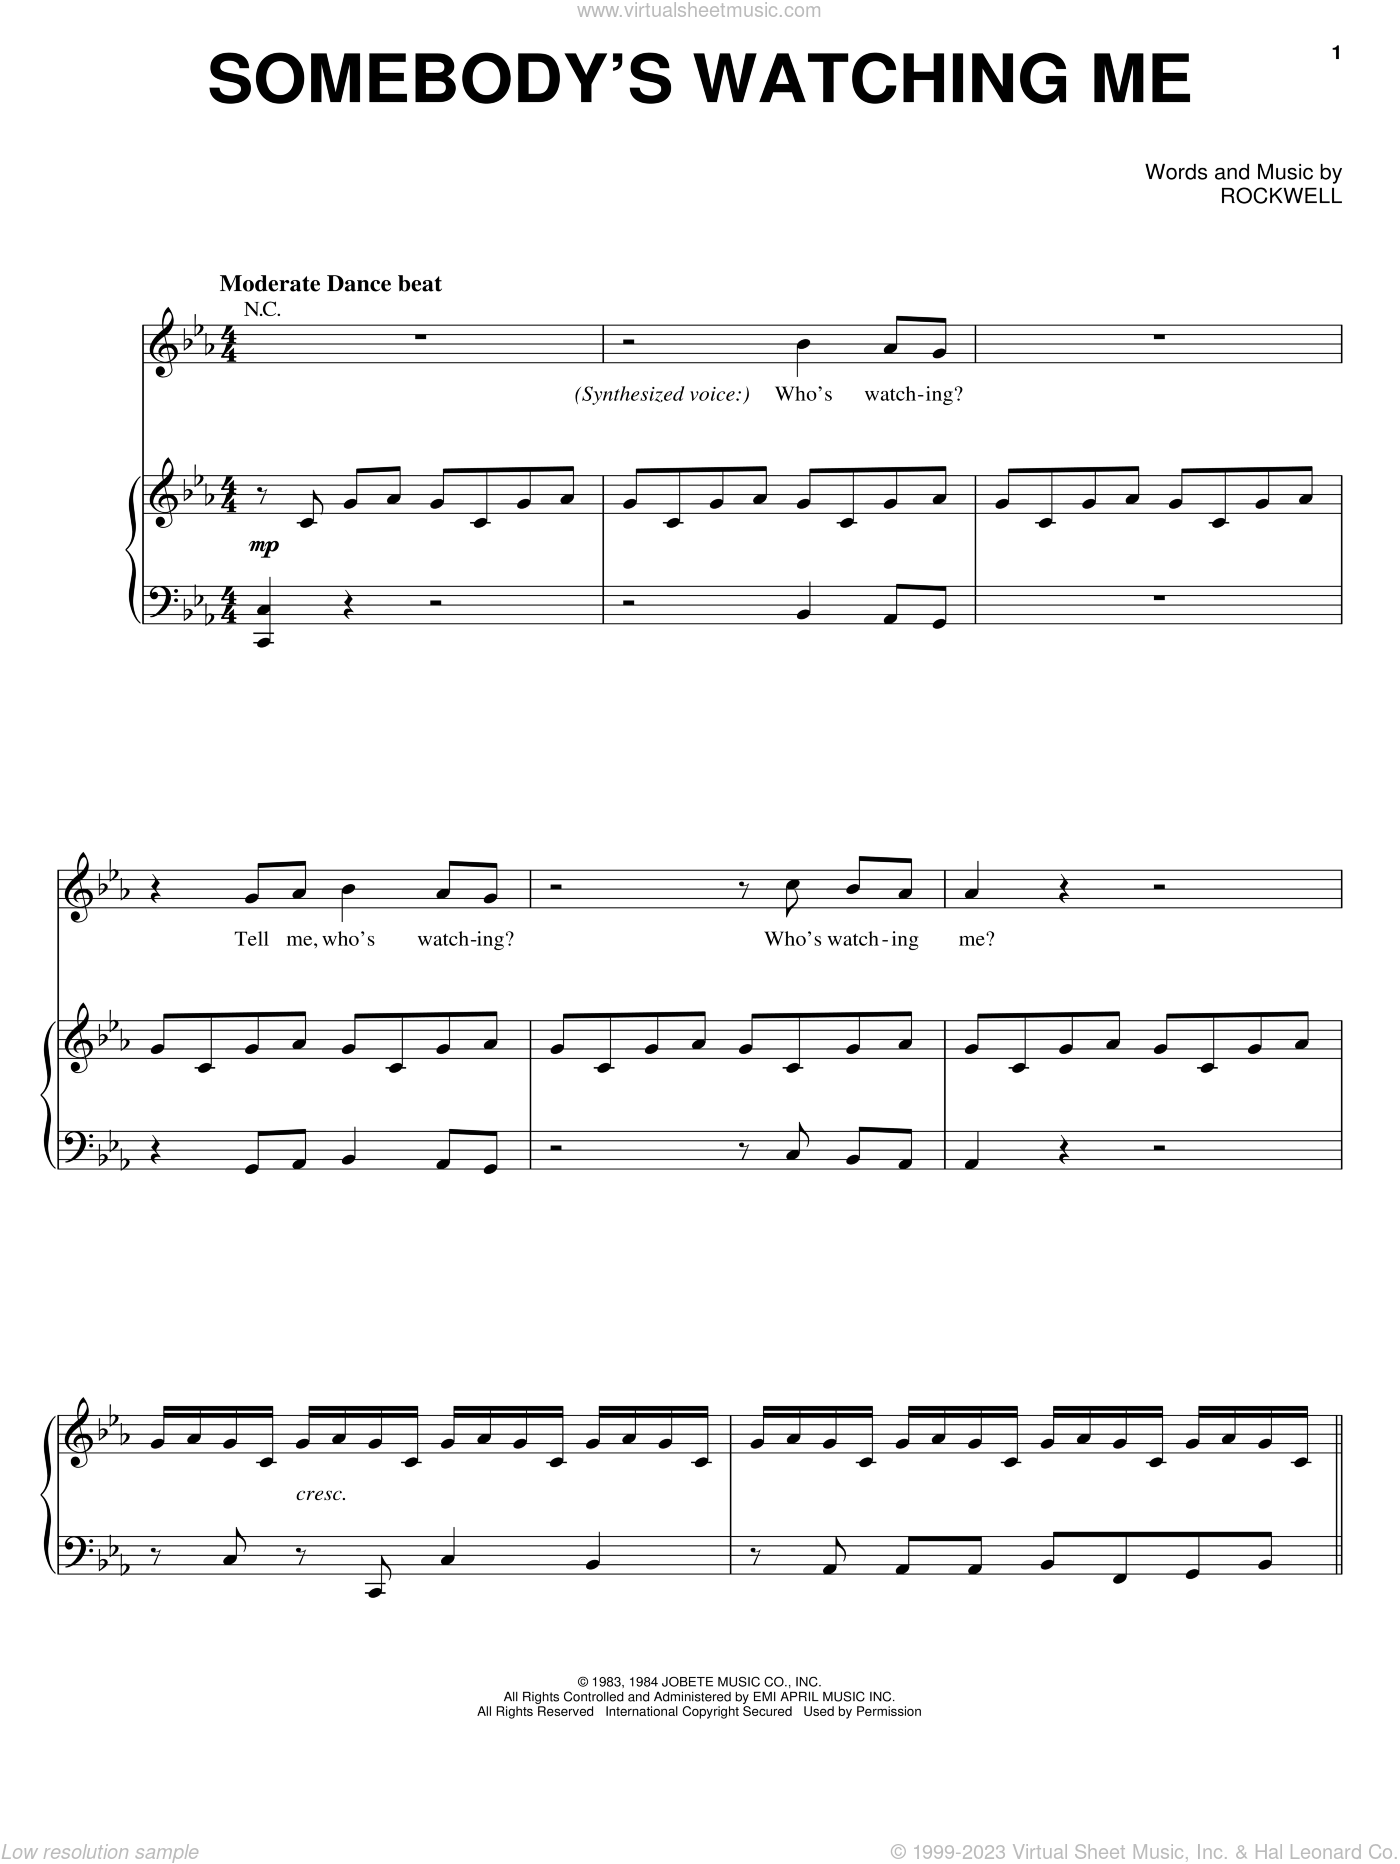 Digital sheet music for voice, piano or guitar NOTE: chords, lead sheet ind...